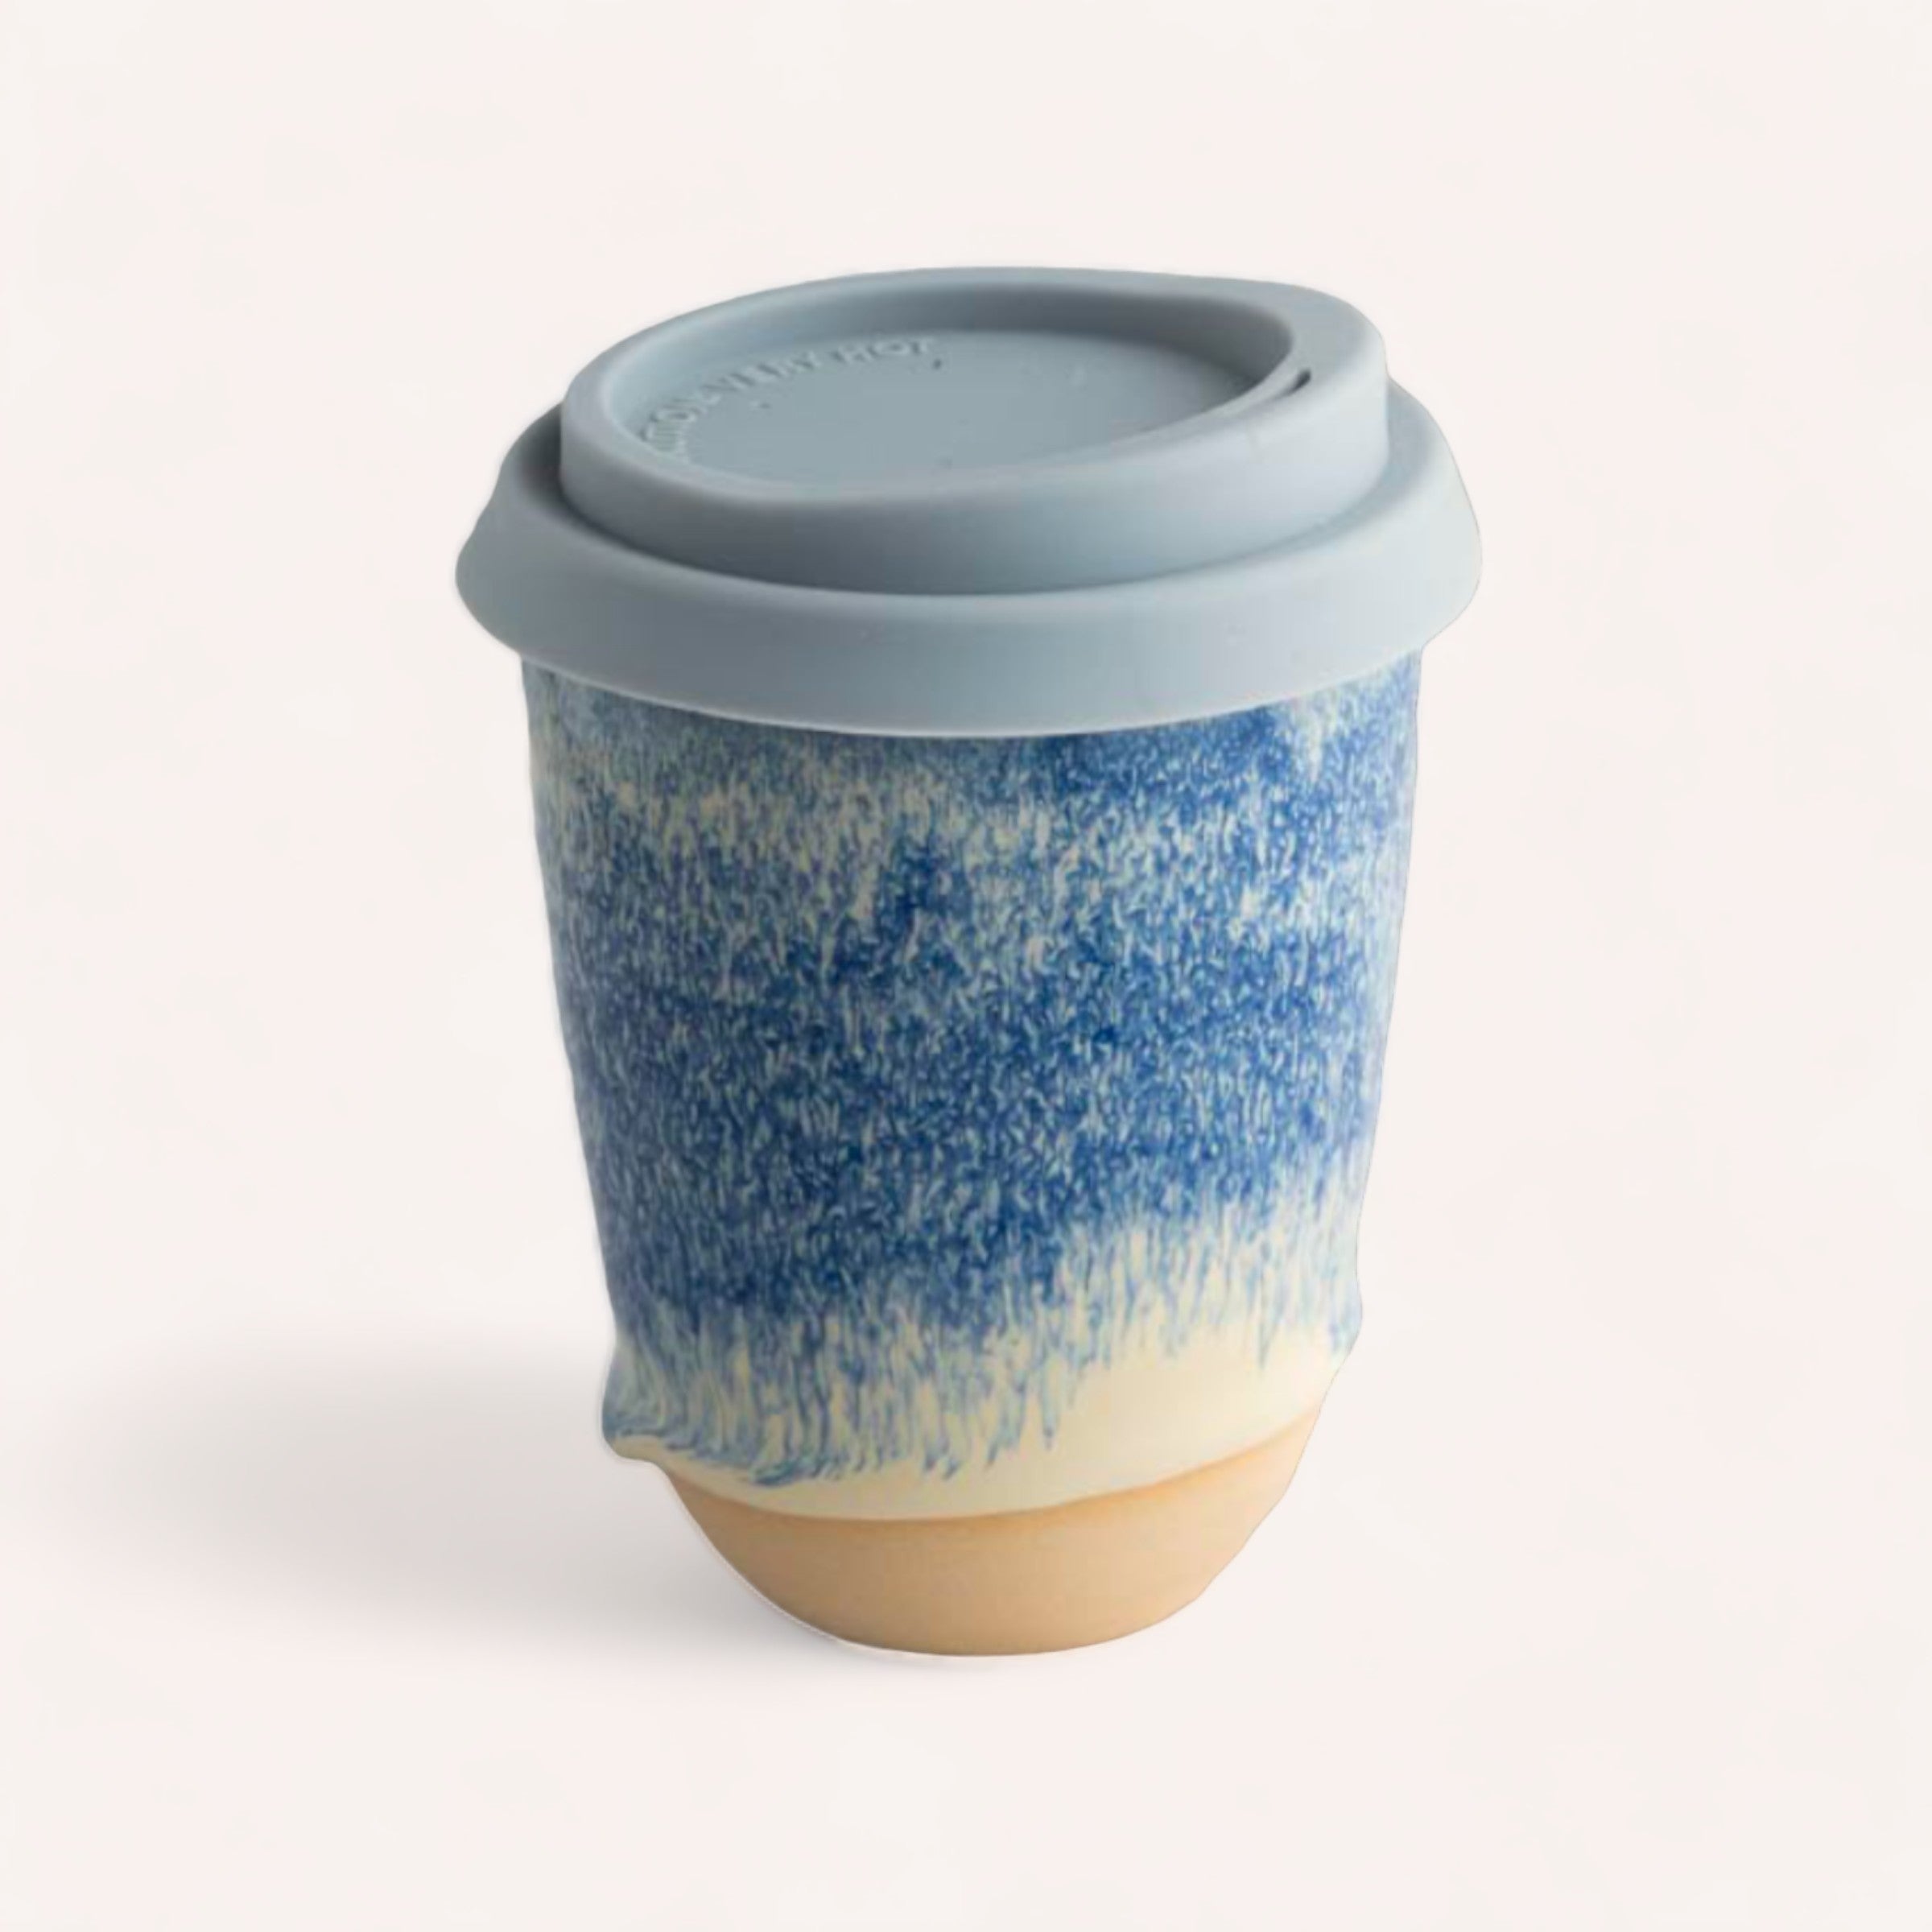 A Sam Mayell Ceramics ceramic keep cup with a unique blue textured design and an NZ sourced stoneware silicone lid.